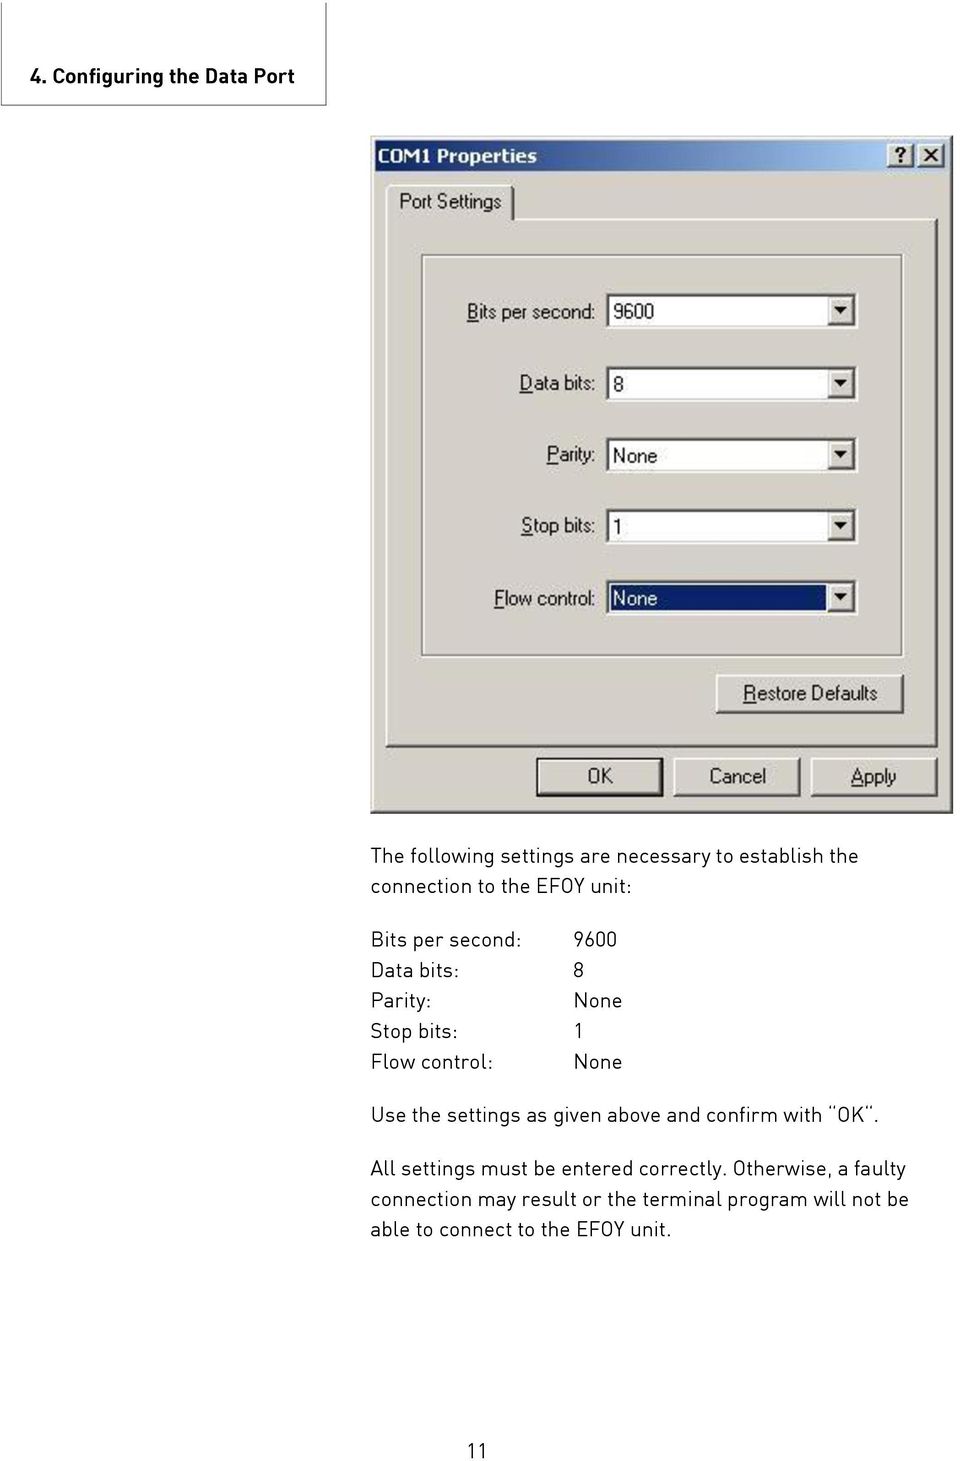 the settings as given above and confirm with OK. All settings must be entered correctly.